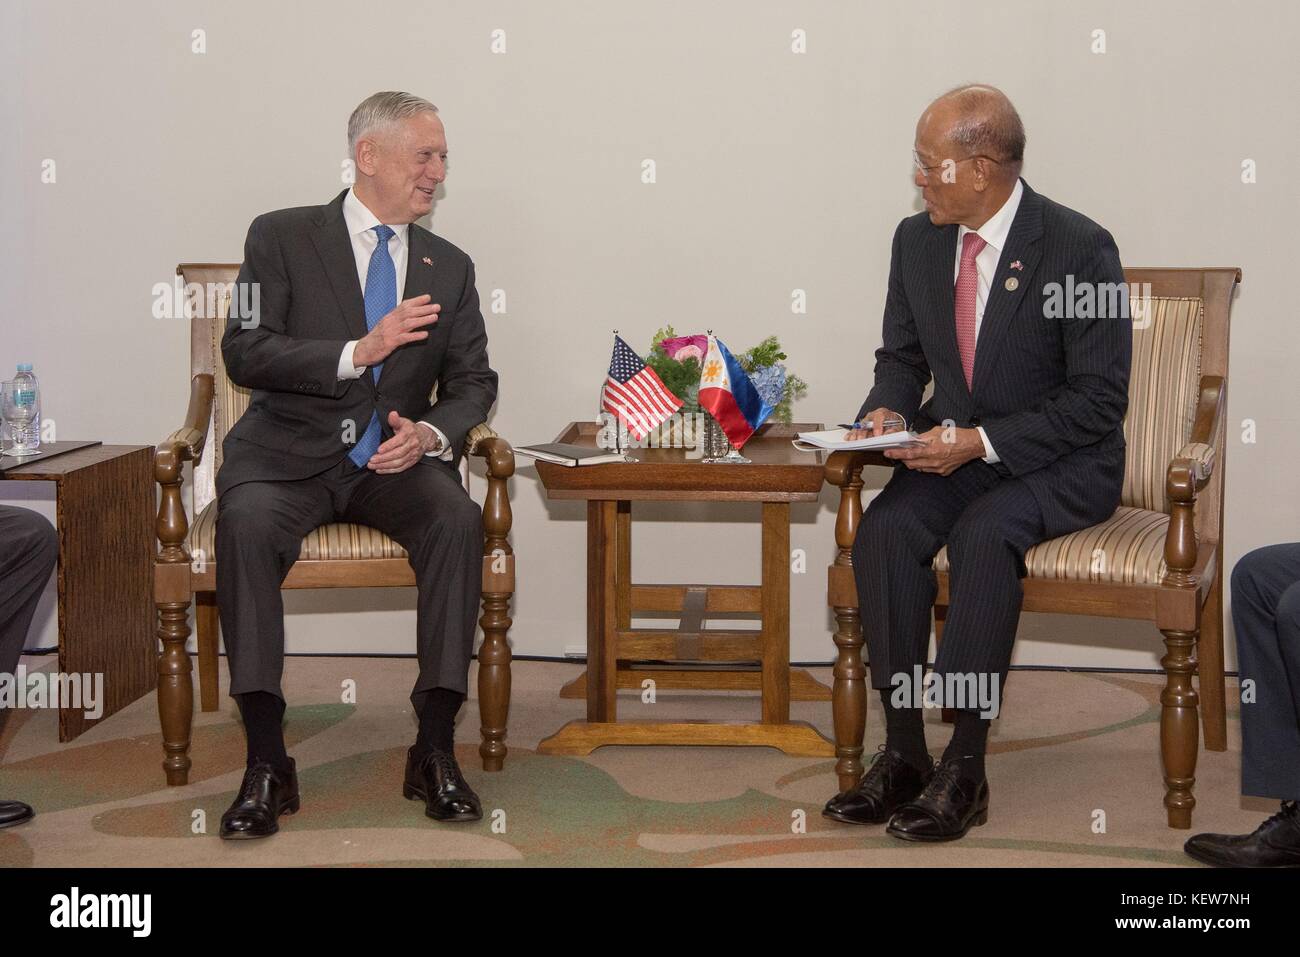 Clark, Philippines. 24th Oct, 2017. U.S. Secretary of Defense Jim Mattis during a bilateral meeting with Philippine Defense Secretary Delfin Lorenzana, right, on the sidelines of the Association of Southeast Asian Nations Defense Ministers meeting October 24, 2017 in Clark, Philippines. Mattis is meeting with many allies and partners to discuss security challenges in the Asian region. Stock Photo